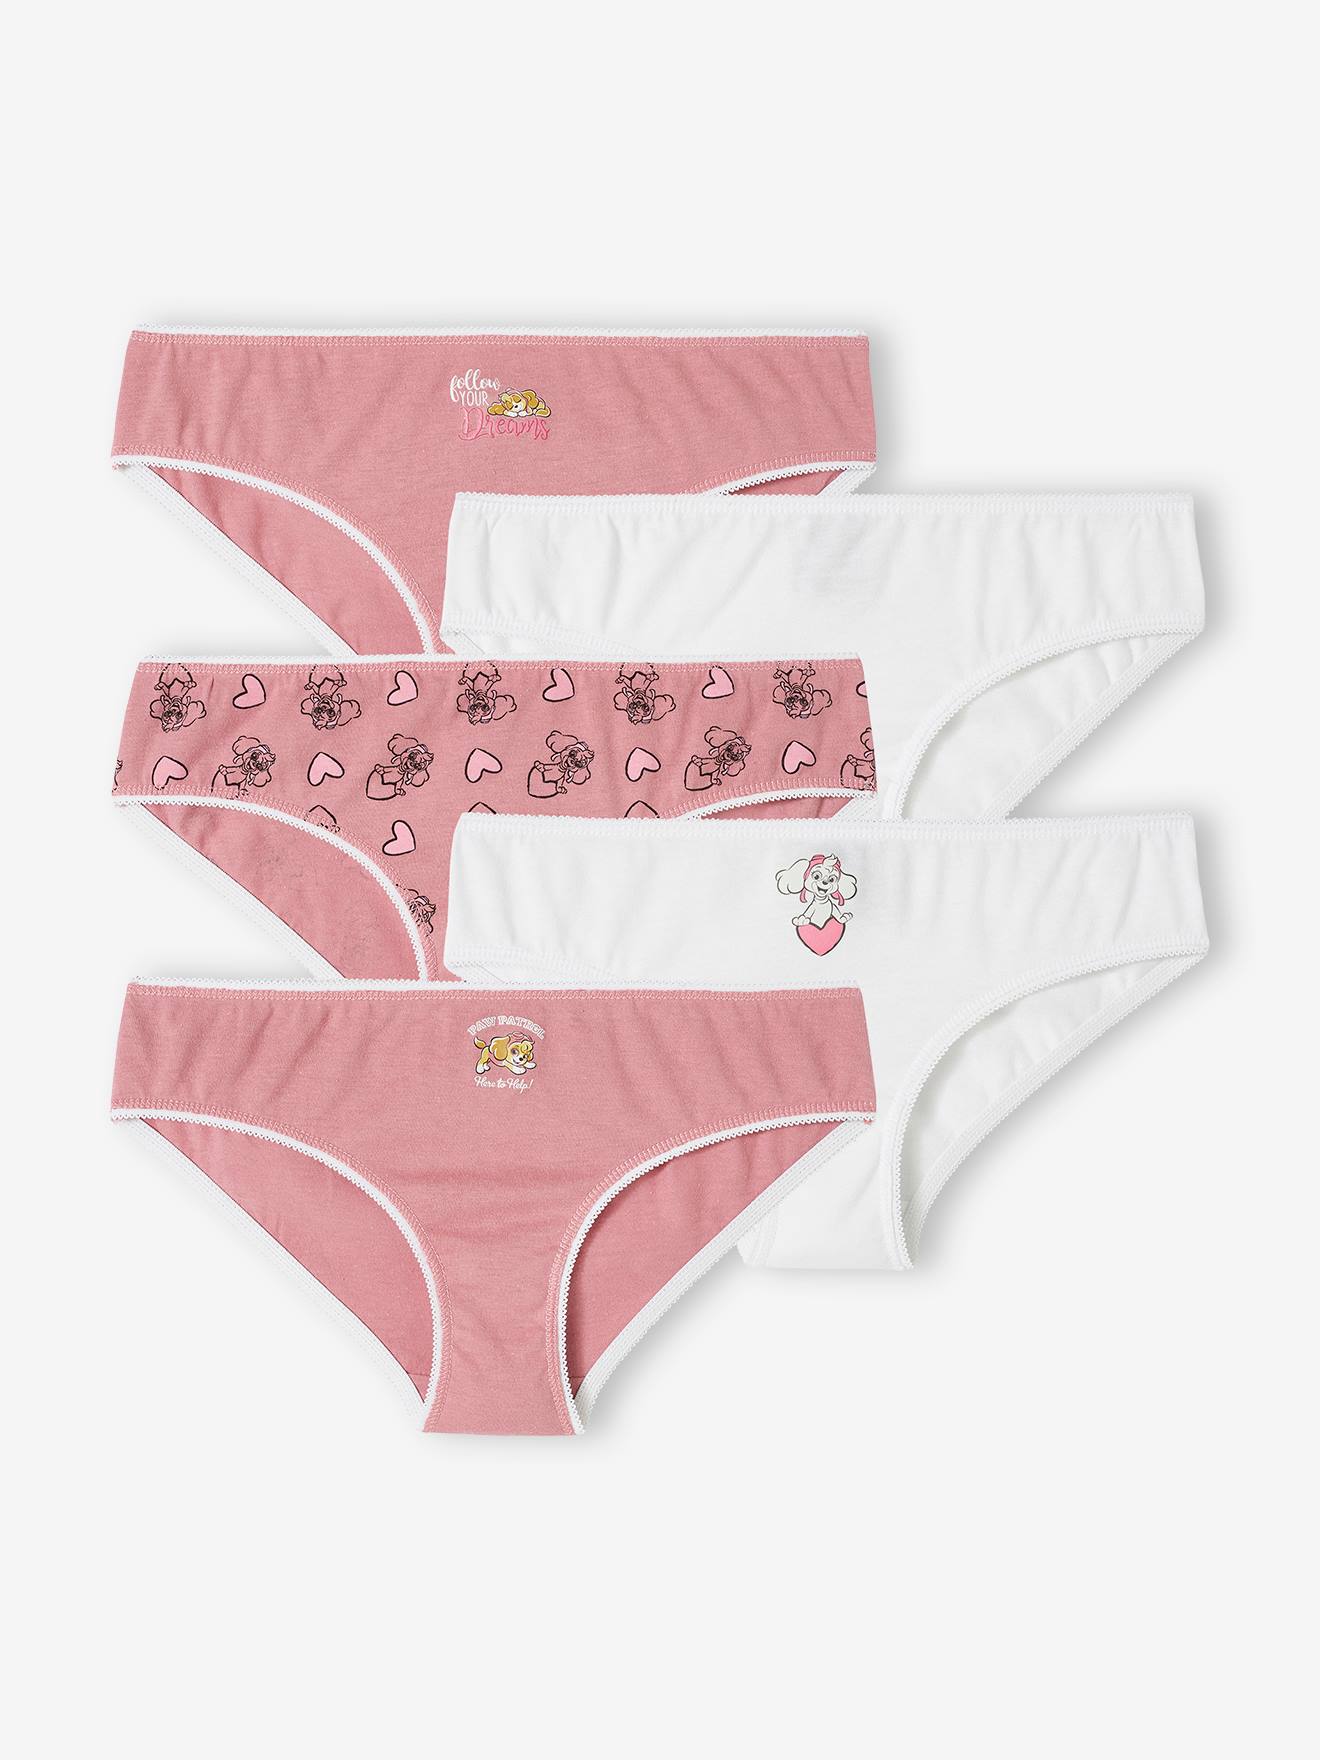 Pack of 5 Paw Patrol® Briefs - lilac, Girls